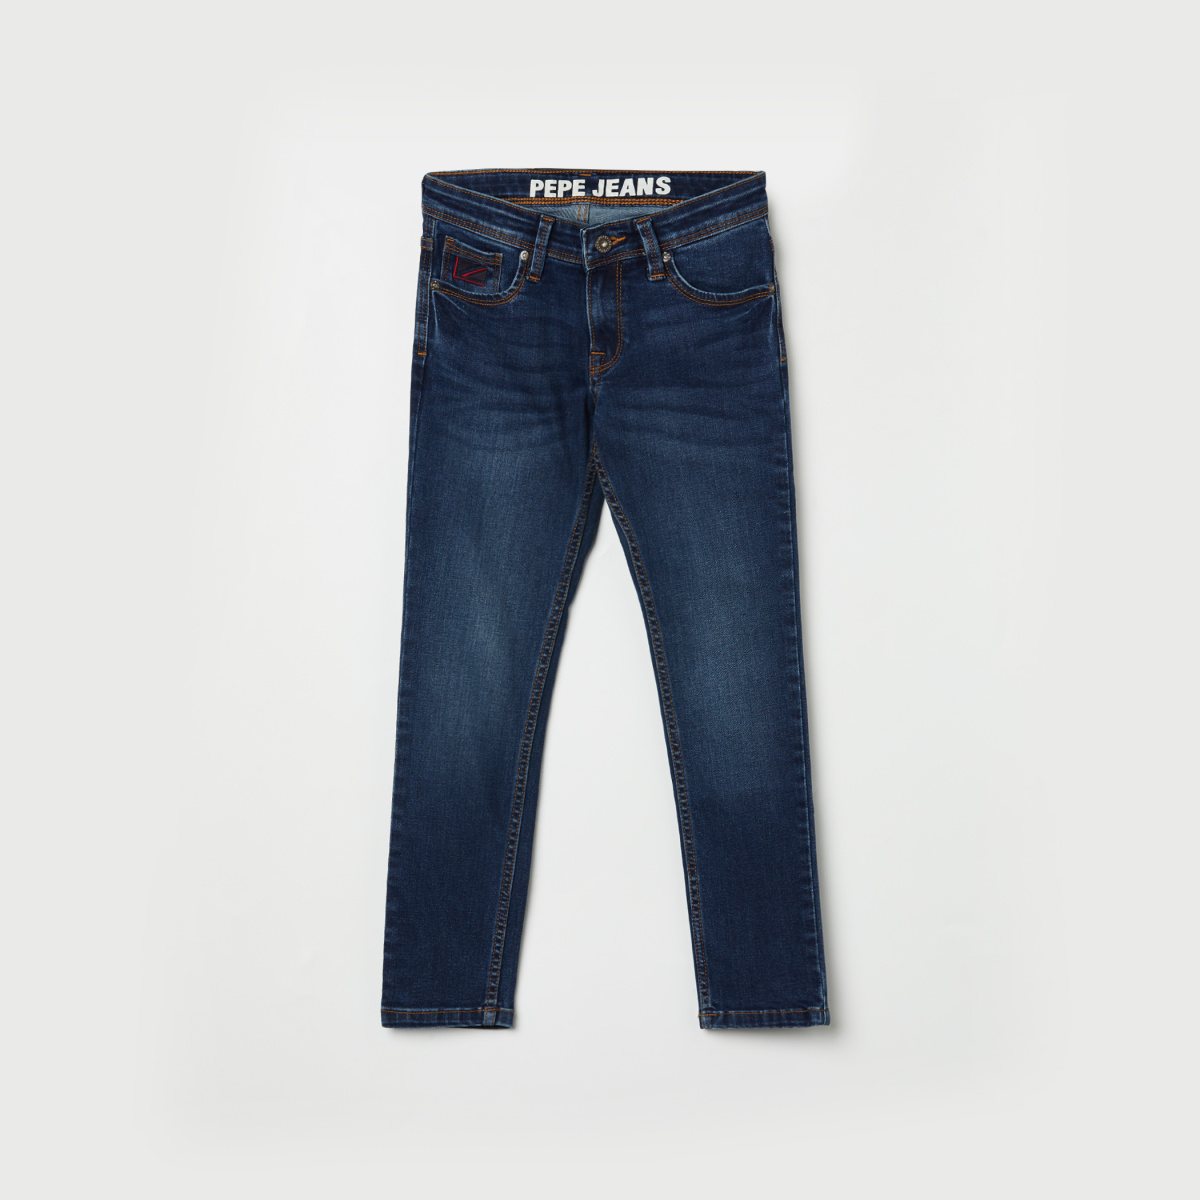 PEPE JEANS Boys Medium Washed Slim Fit Jeans